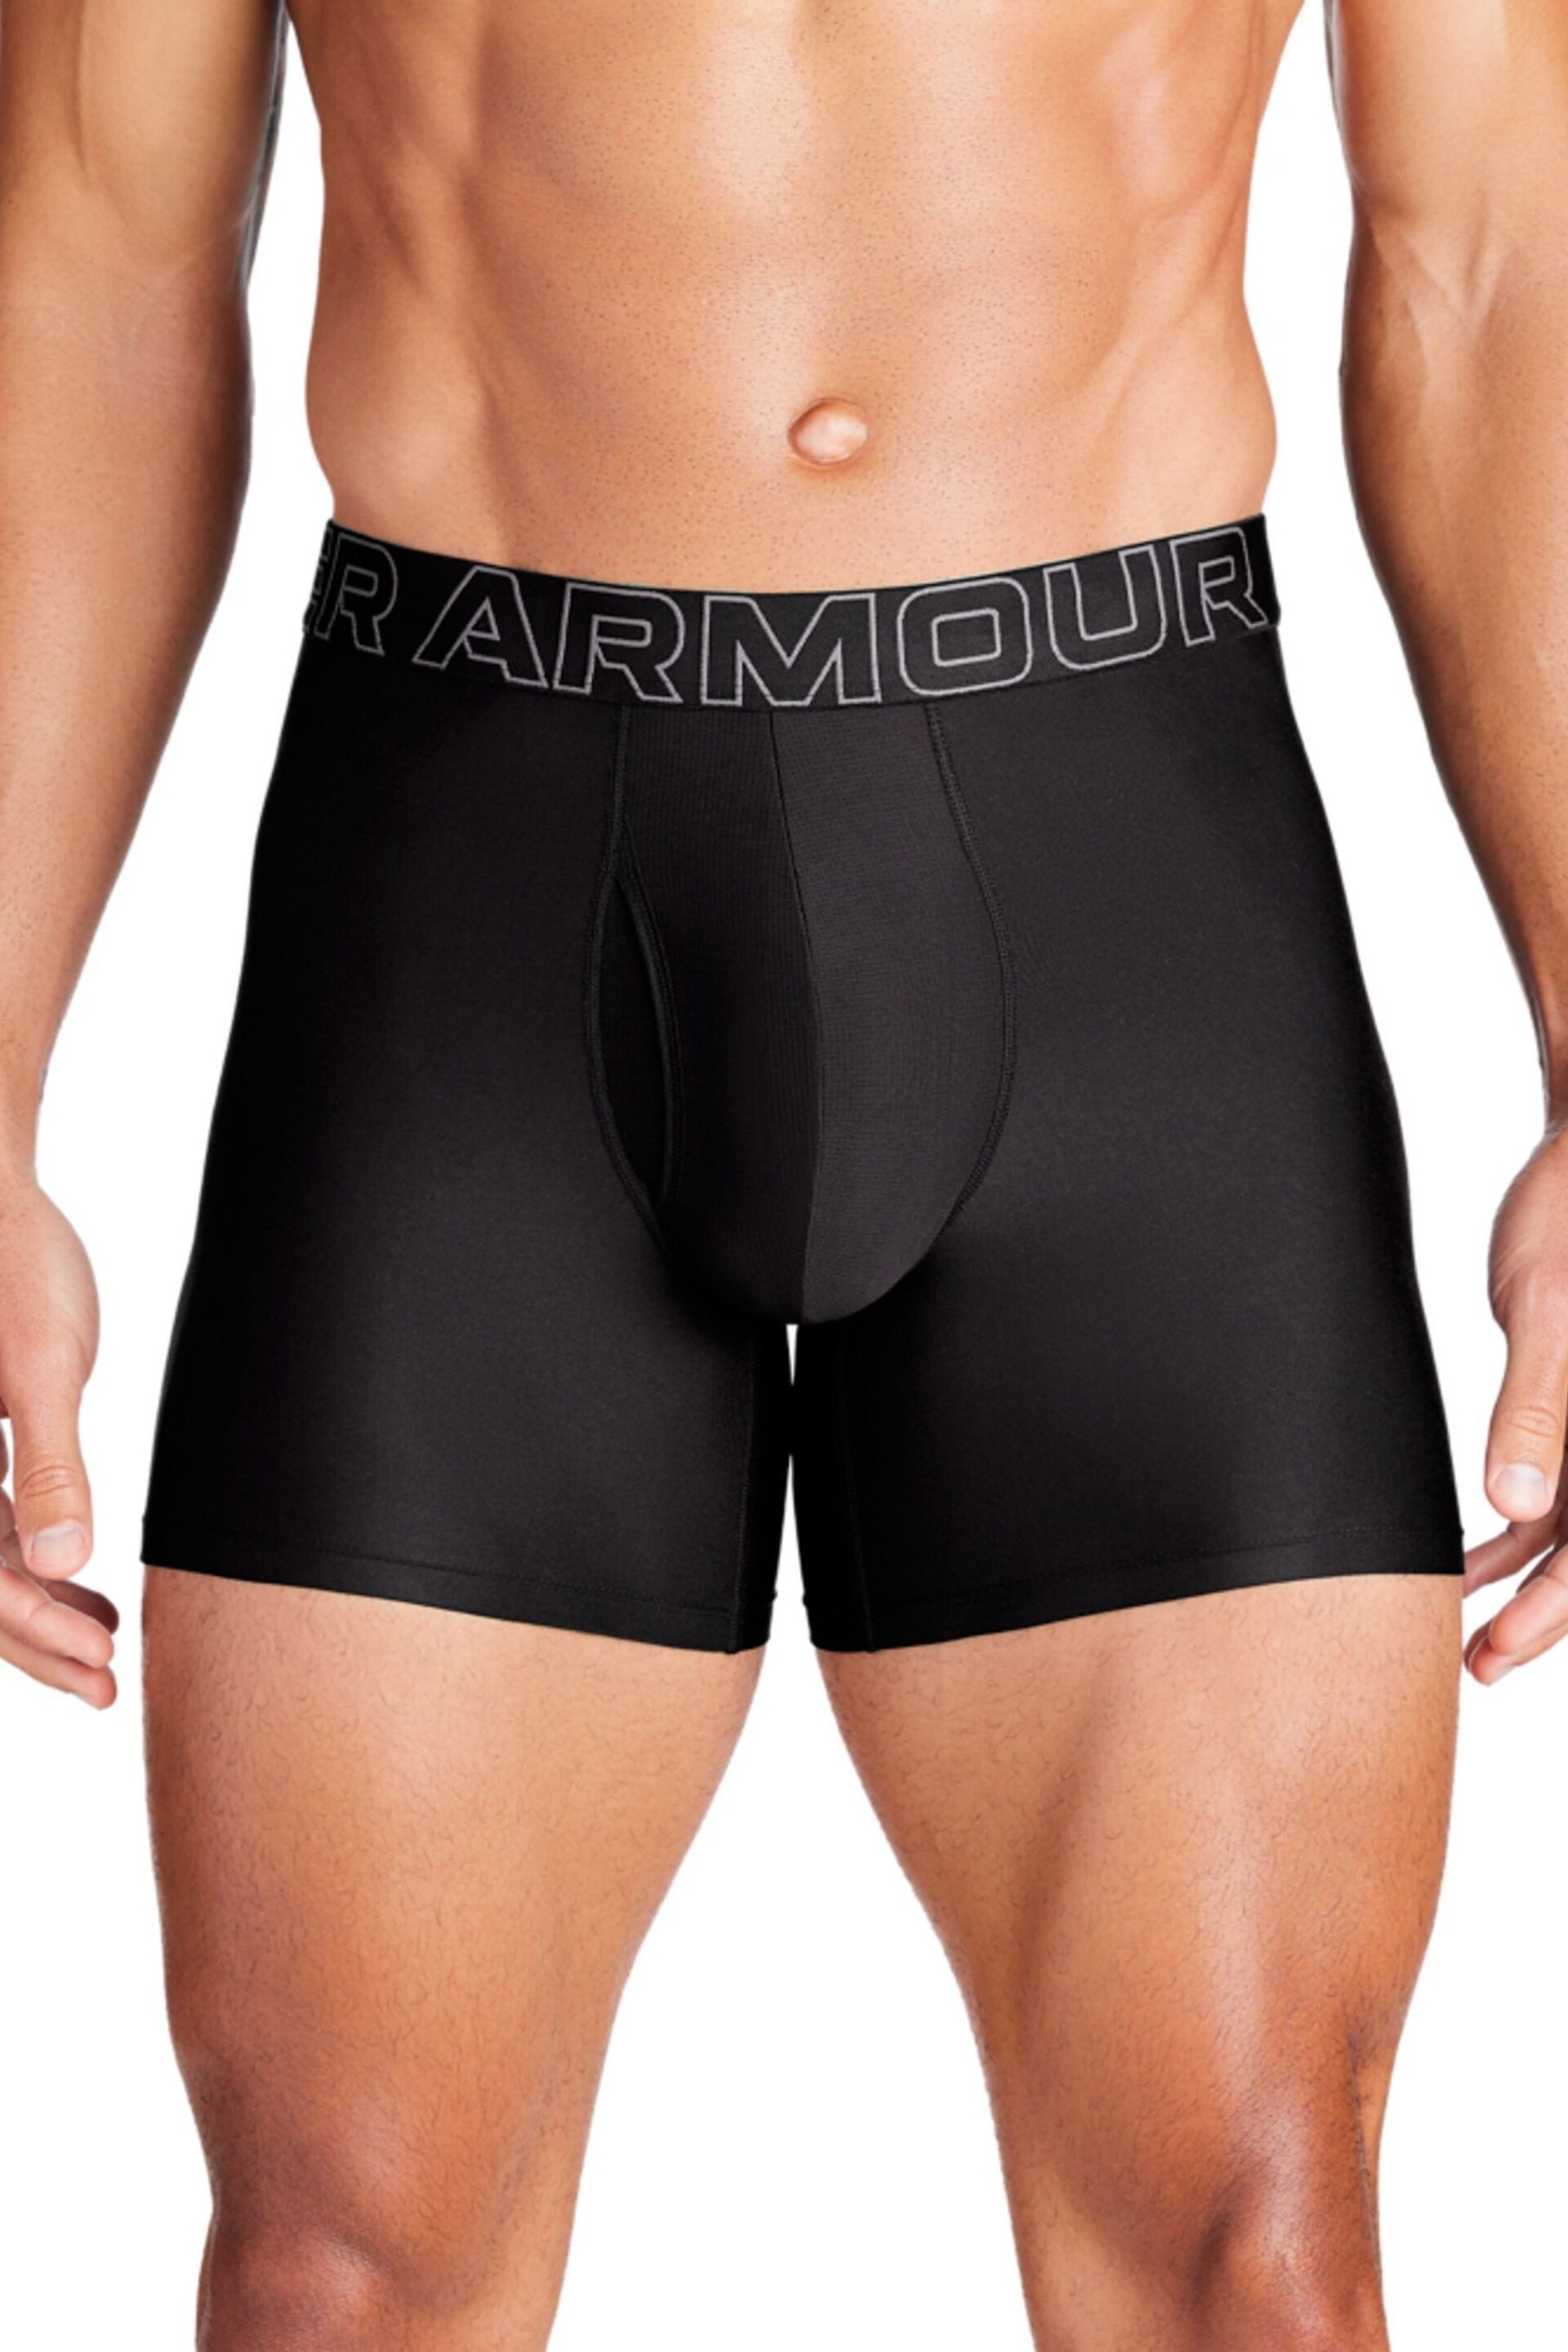 Under Armour Black Performance Tech Boxers 3 Pack - Image 5 of 6